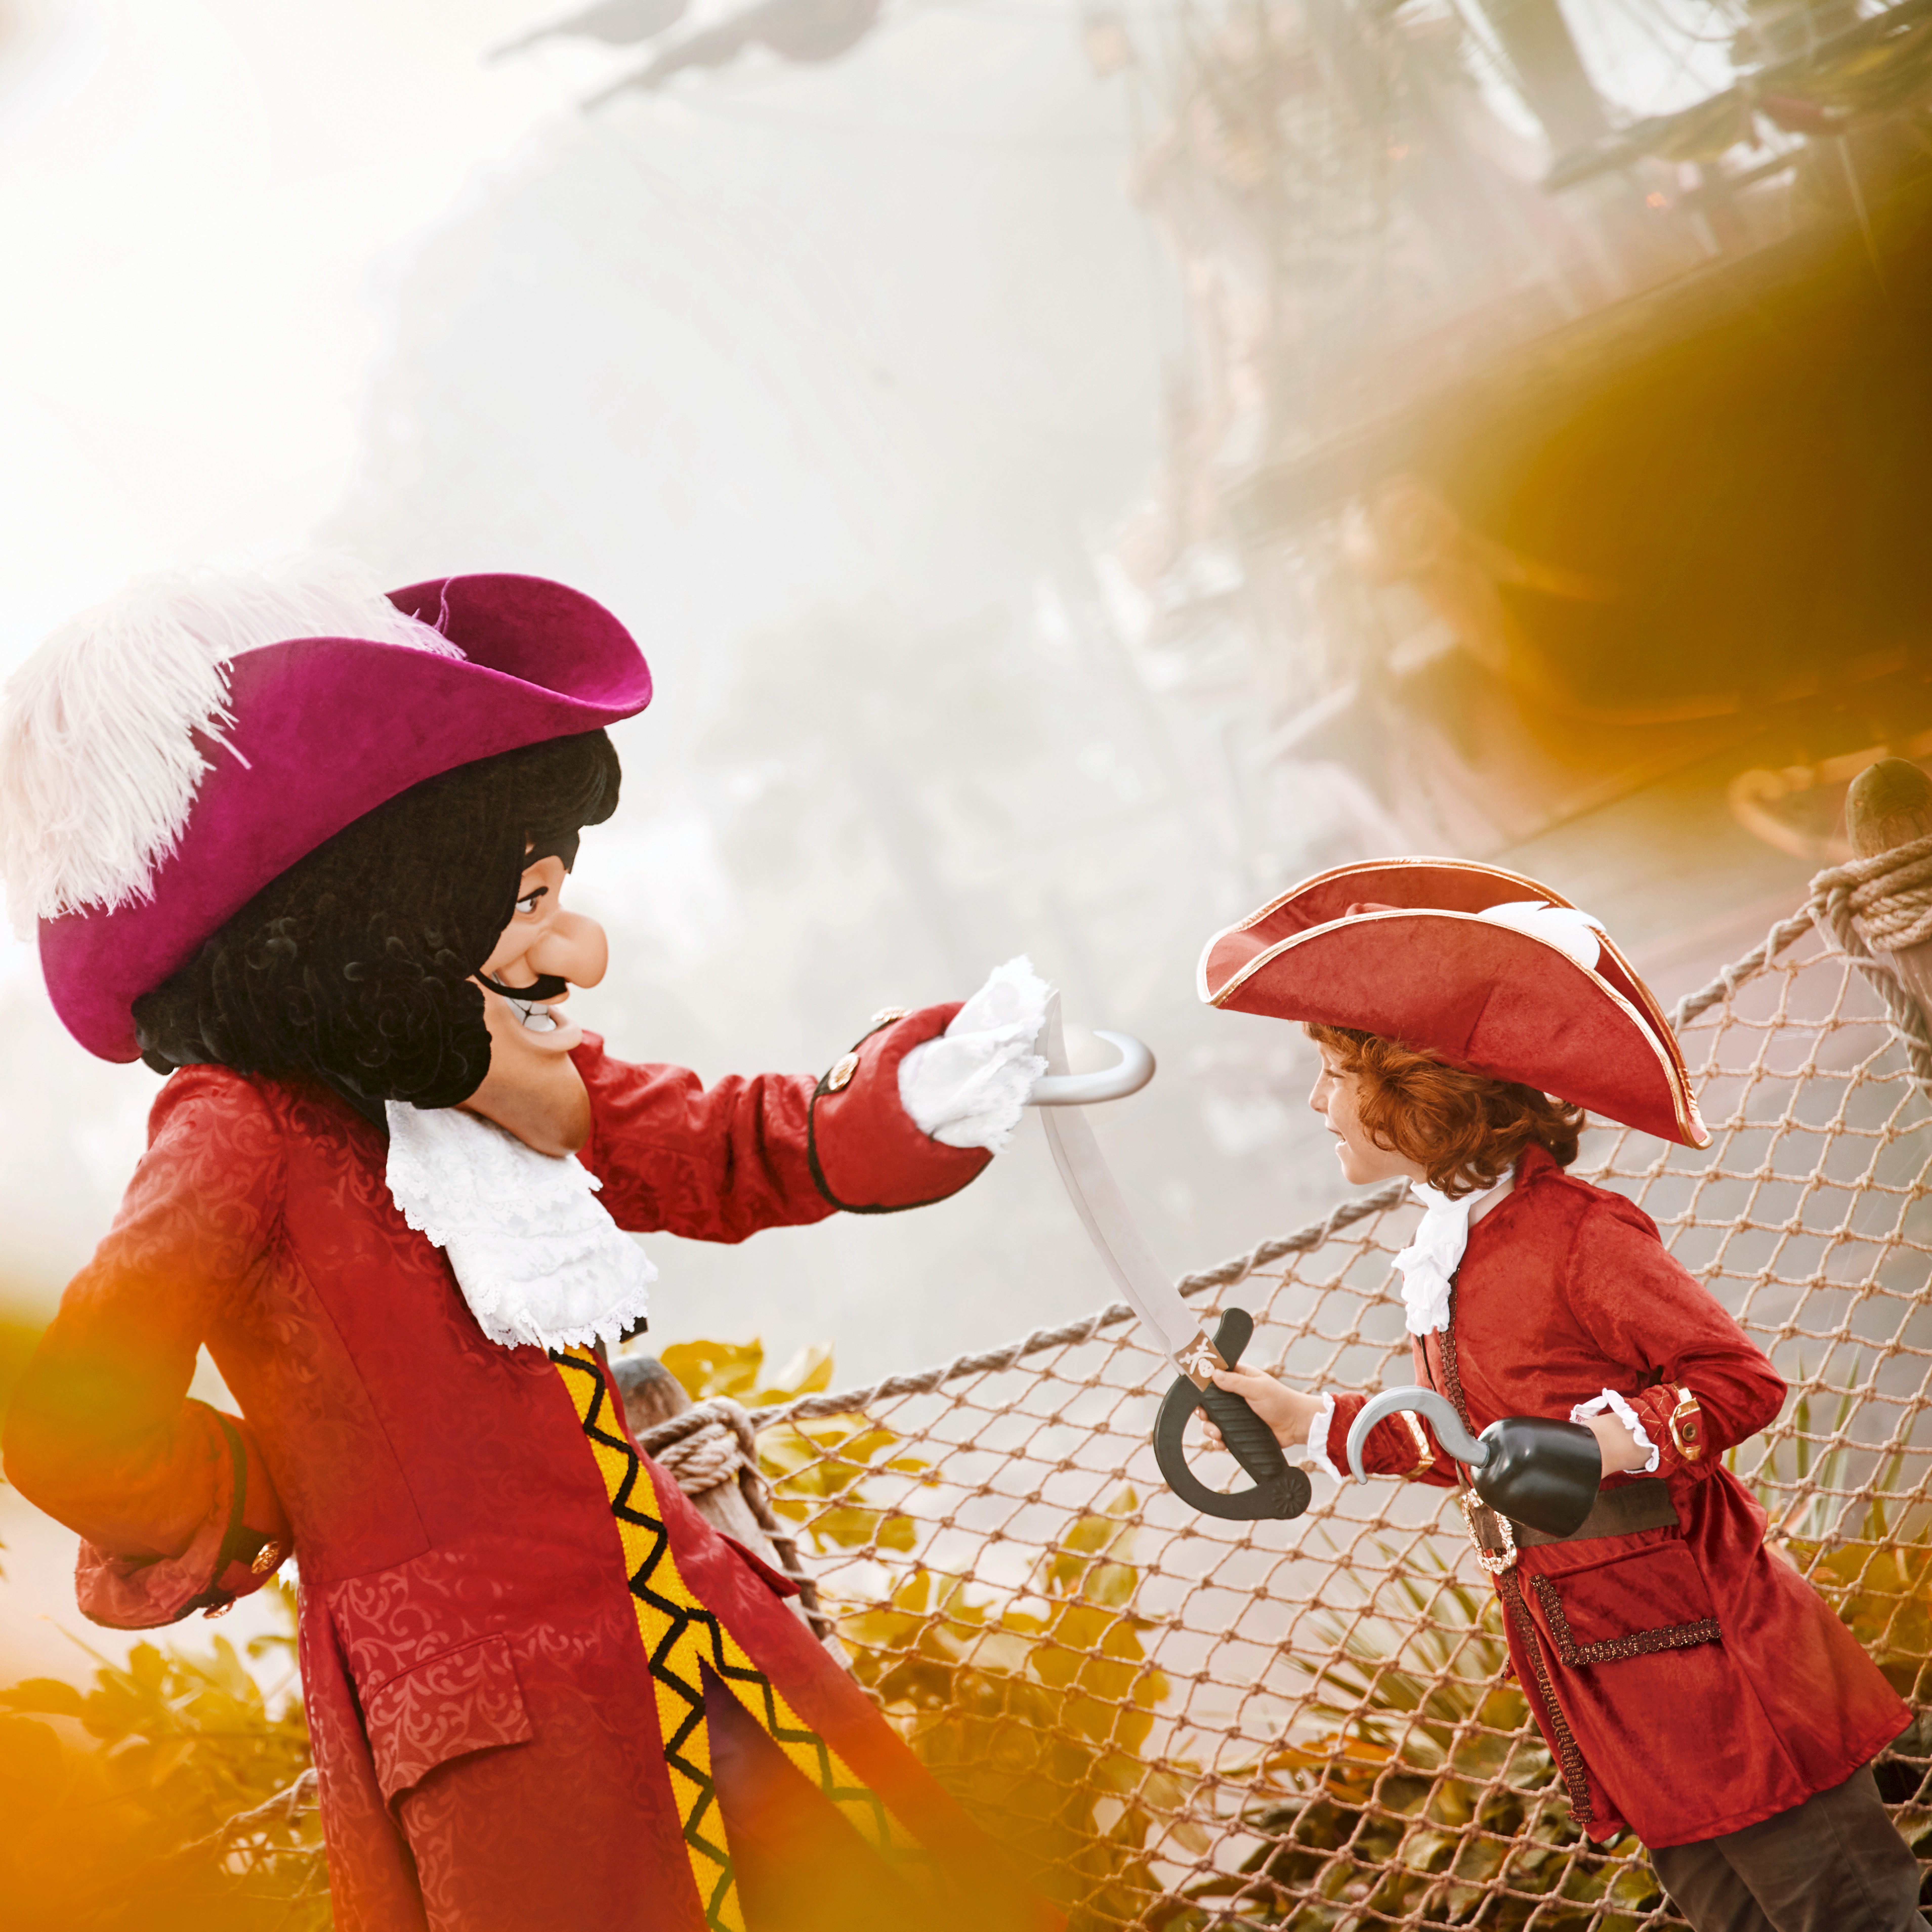 Costumed Captian Hook character interacting with child in pirate outfit